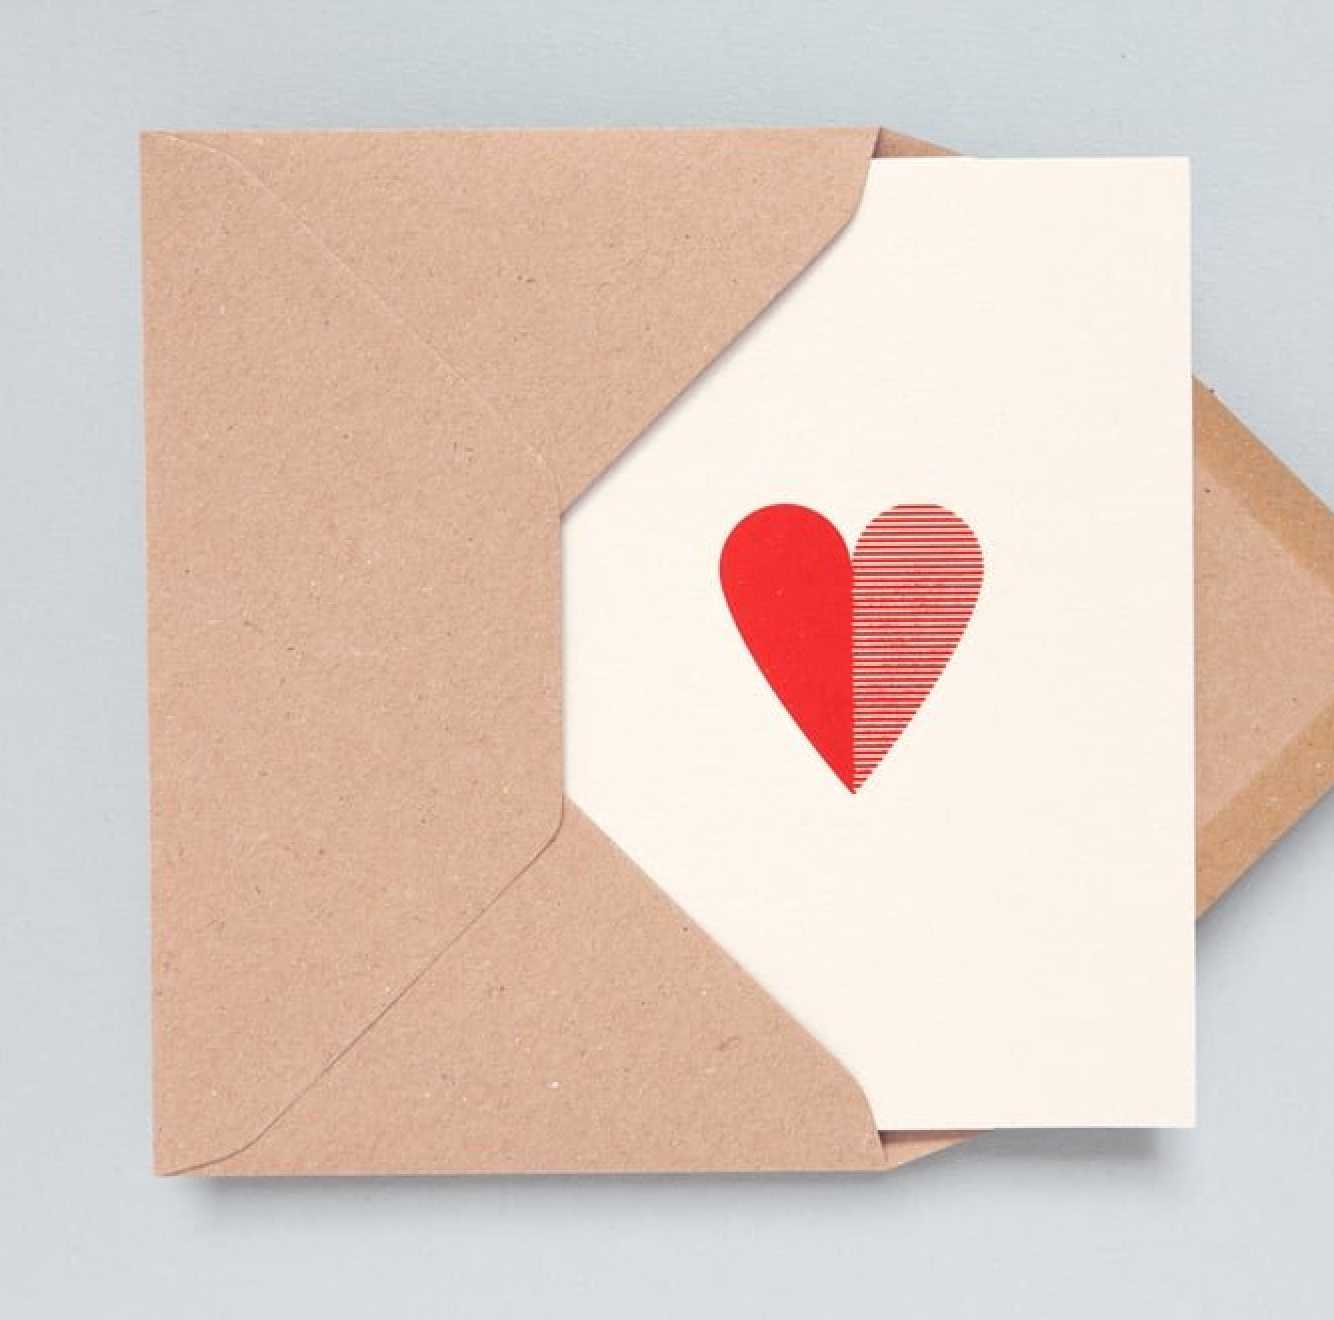 Ola Foil blocked Heart card - Red on Stone